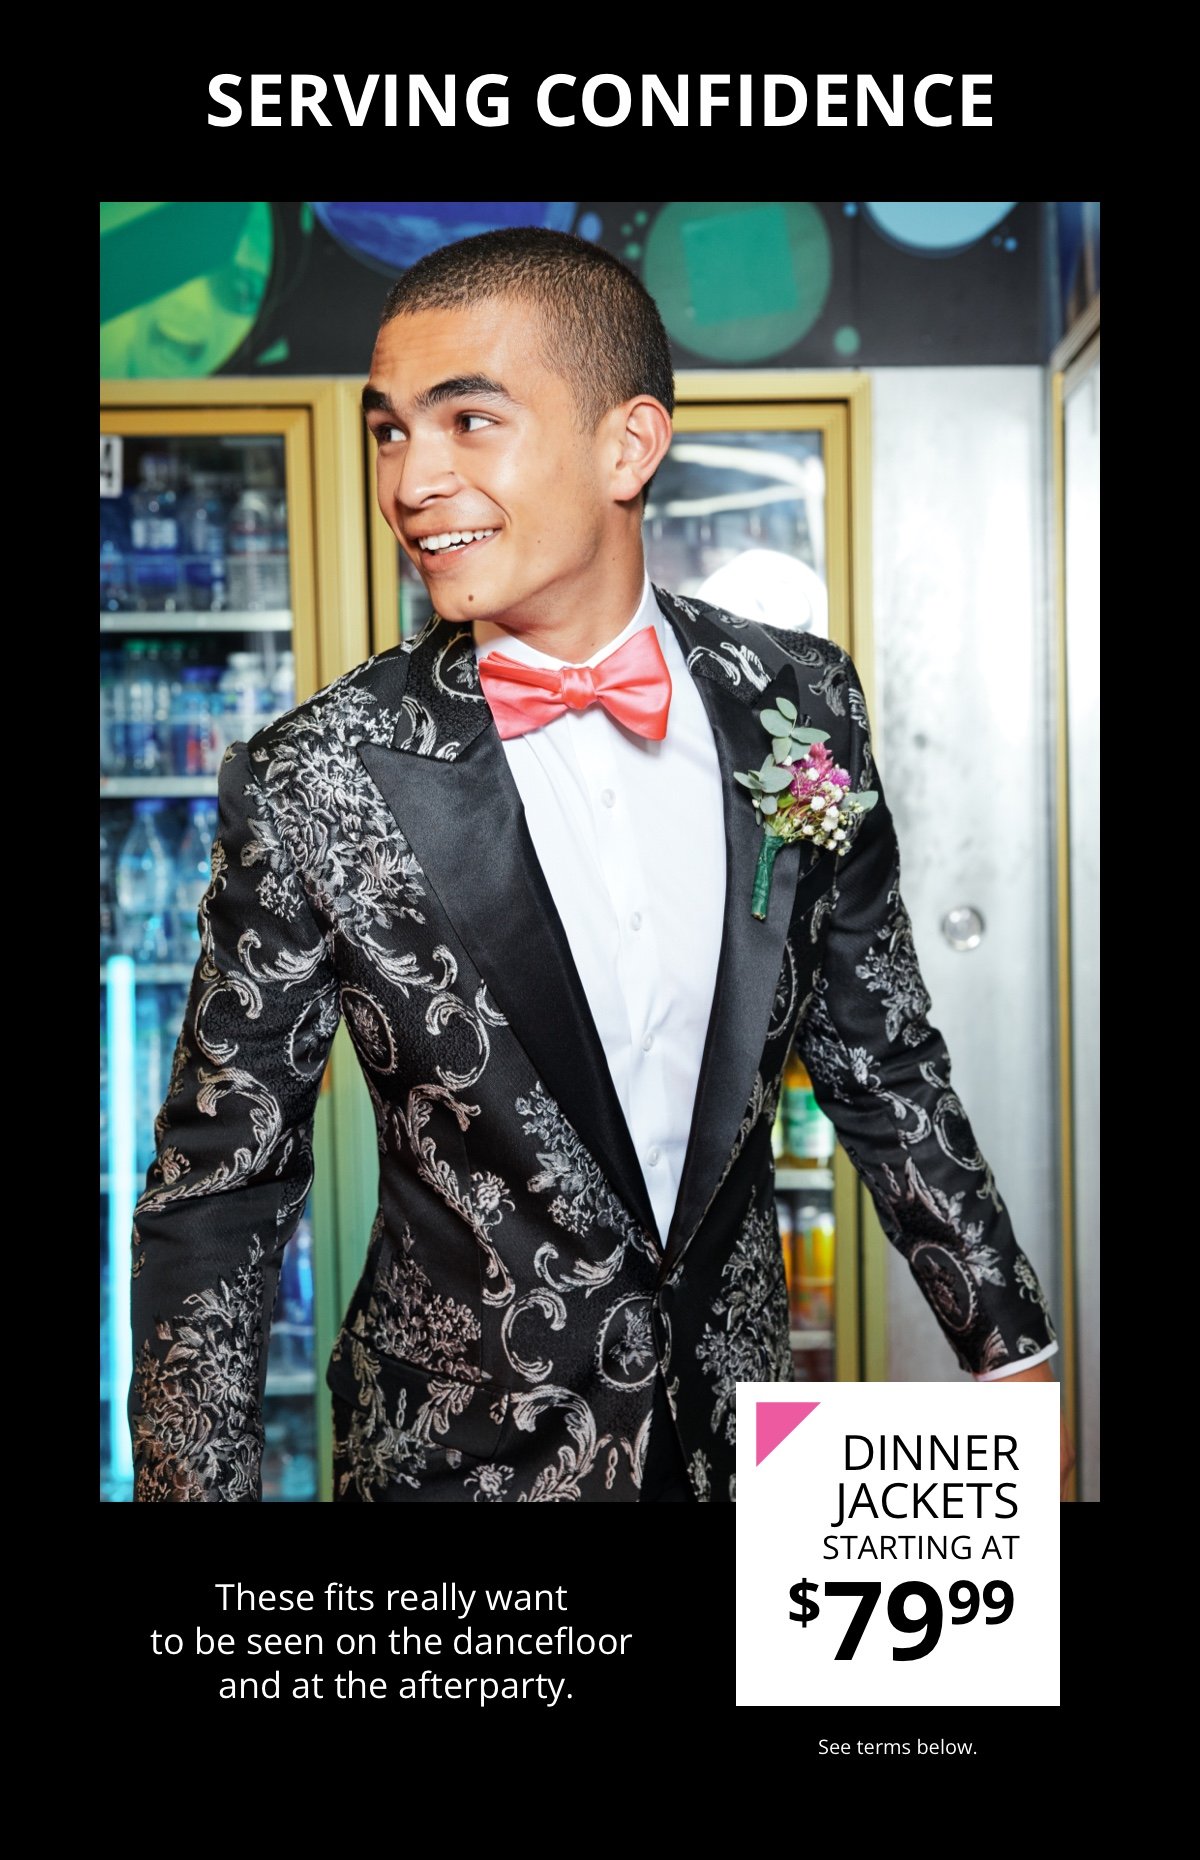 Serving Confidence | Prom Dinner Jackets Starting at \\$79.99 These fits really want to be seen on the dancefloor and at the afterparty. See terms below.